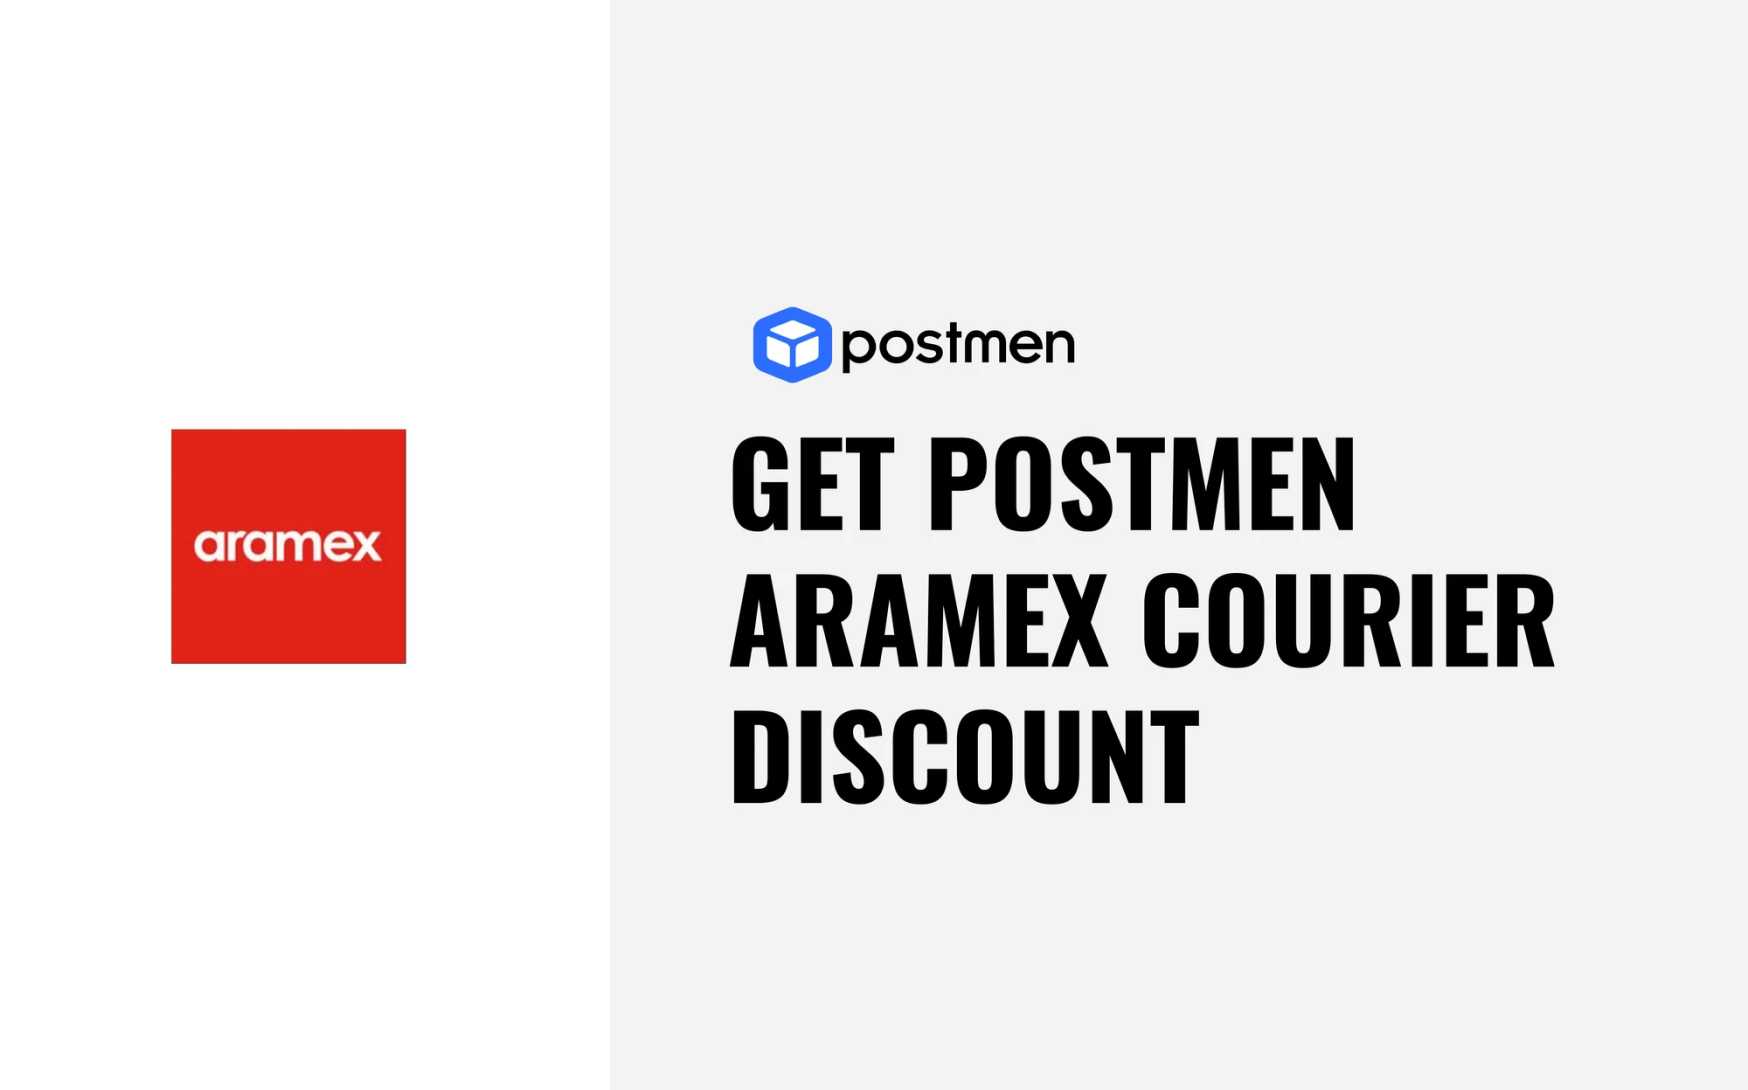 Enjoy 10% off of Aramex courier account with Postmen